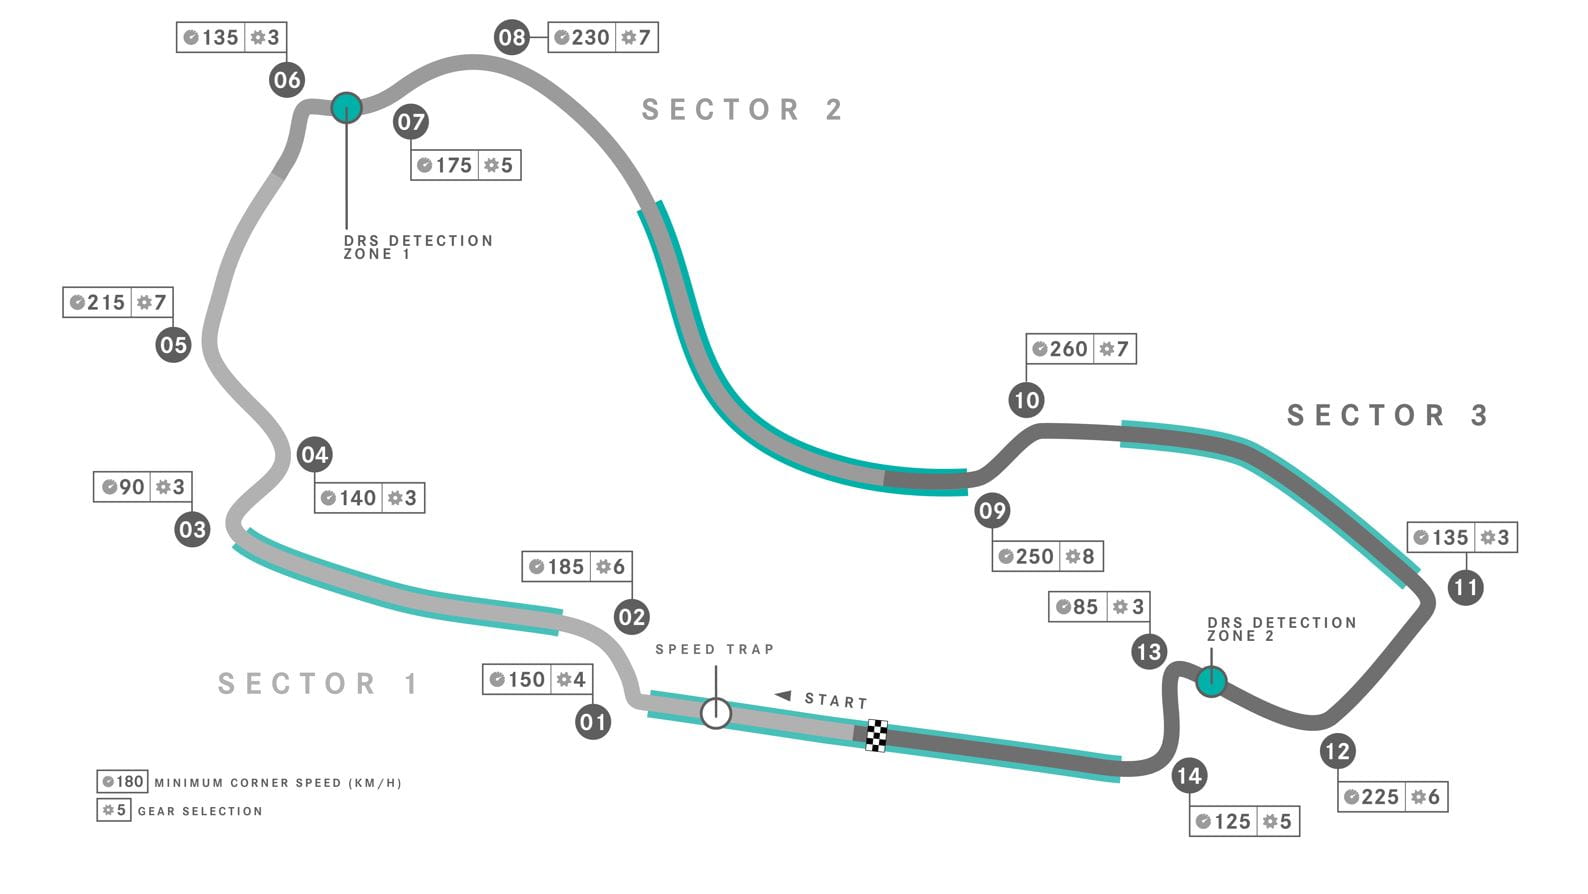 A map of the Melbourne Formula 1 circuit.